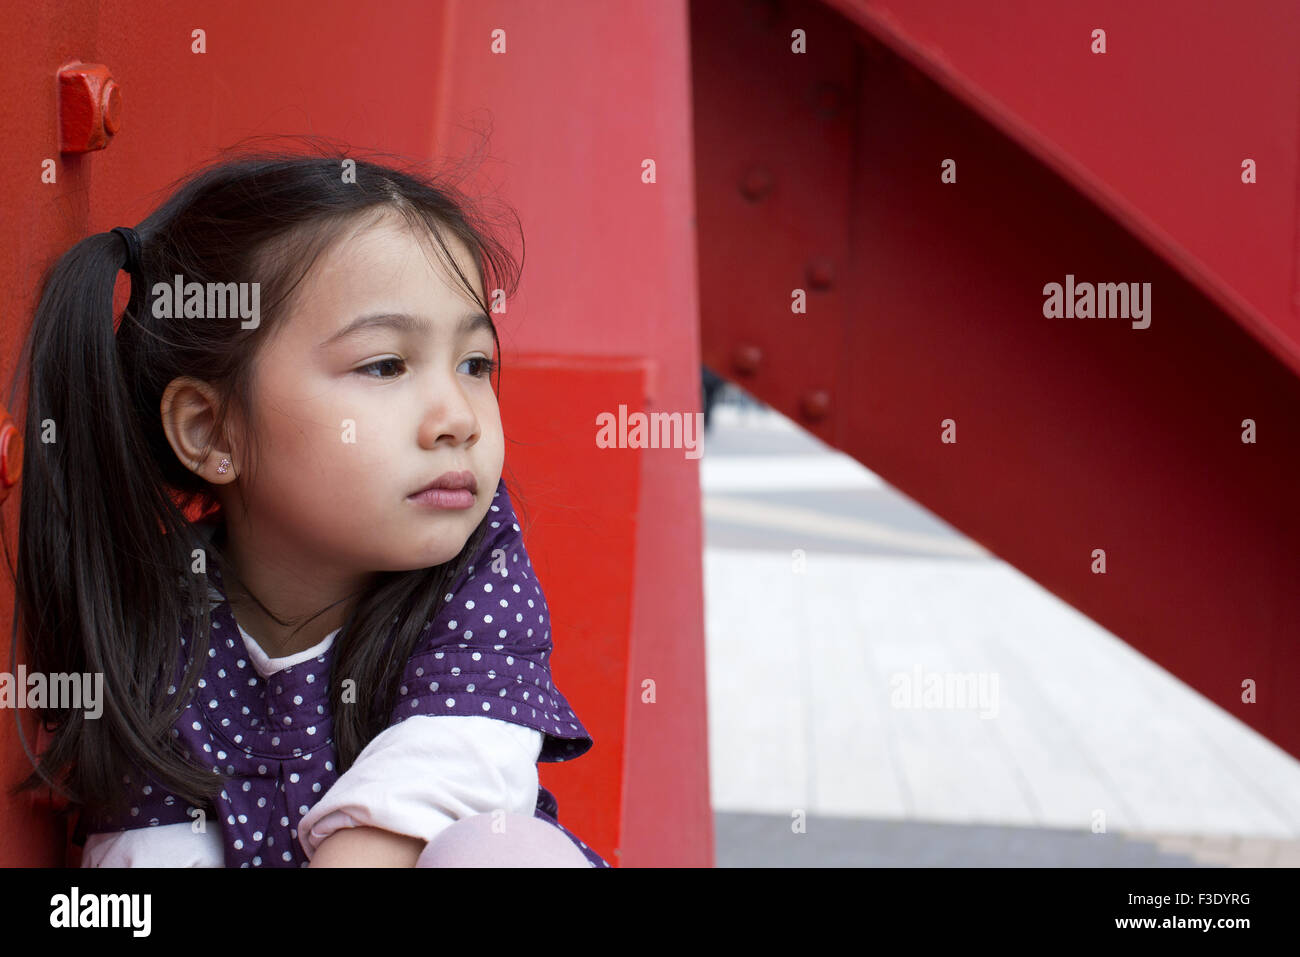 Little girl looking away with look of disappointment Stock Photo